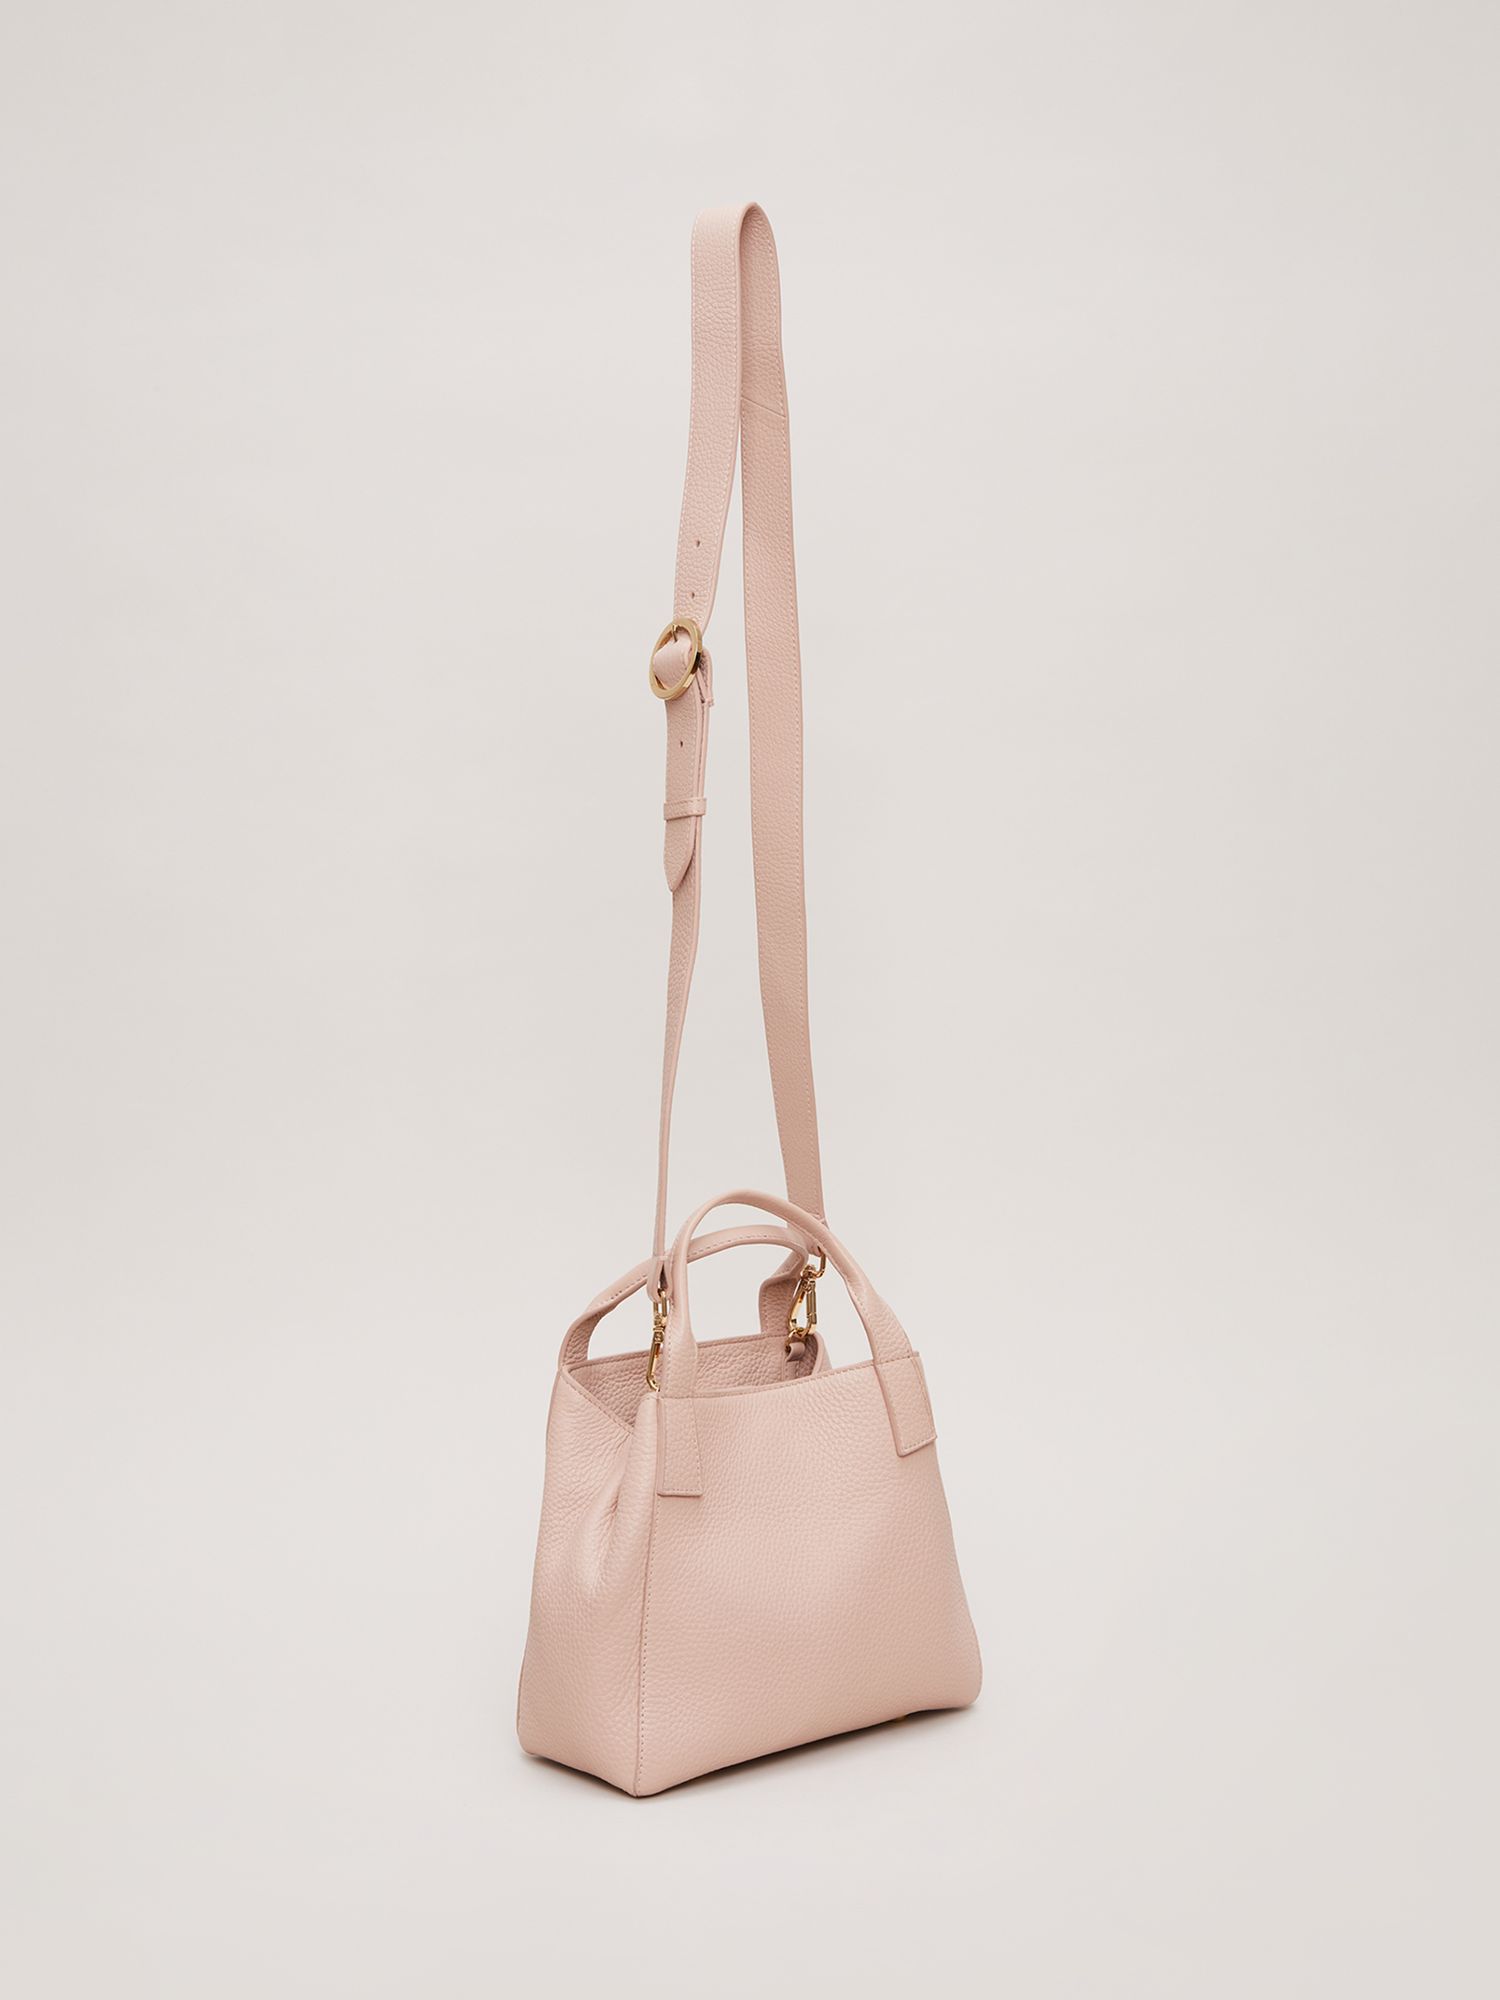 Phase Eight Mini Leather Tote Bag, Pale Pink